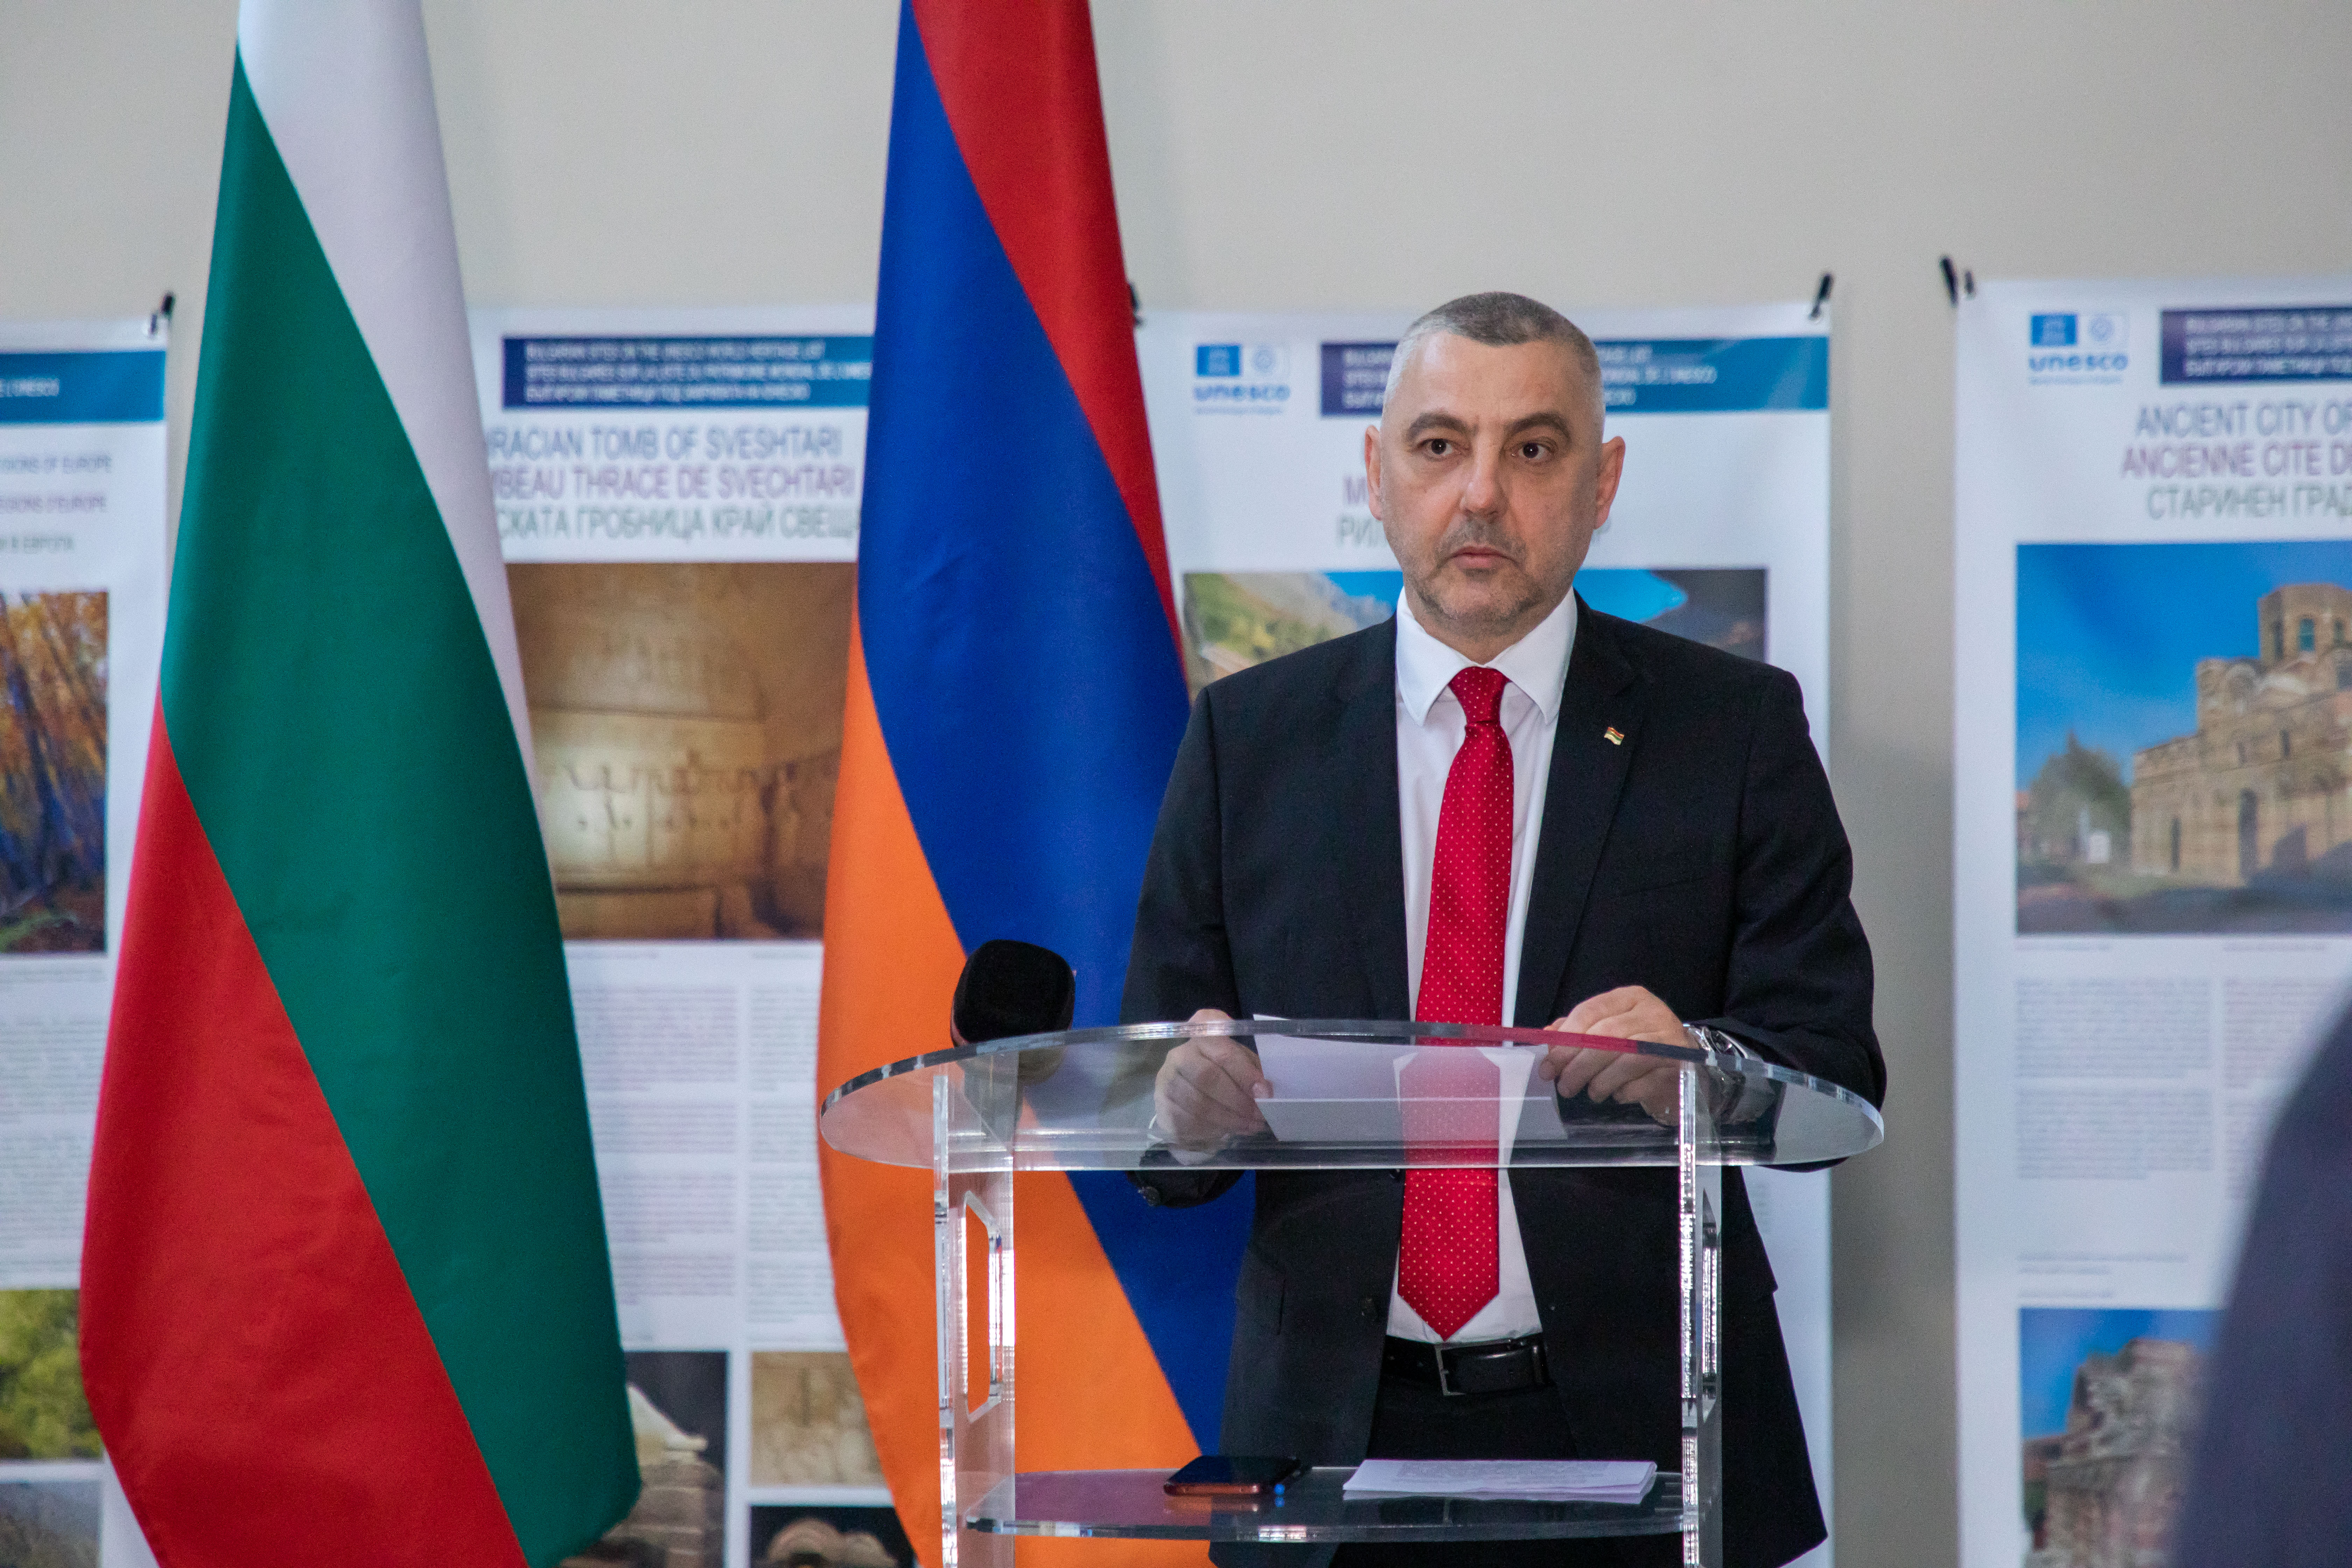 Bulgaria's Liberation from the Ottoman Empire was celebrated in the ceremonial hall of the National Polytechnic University of Armenia